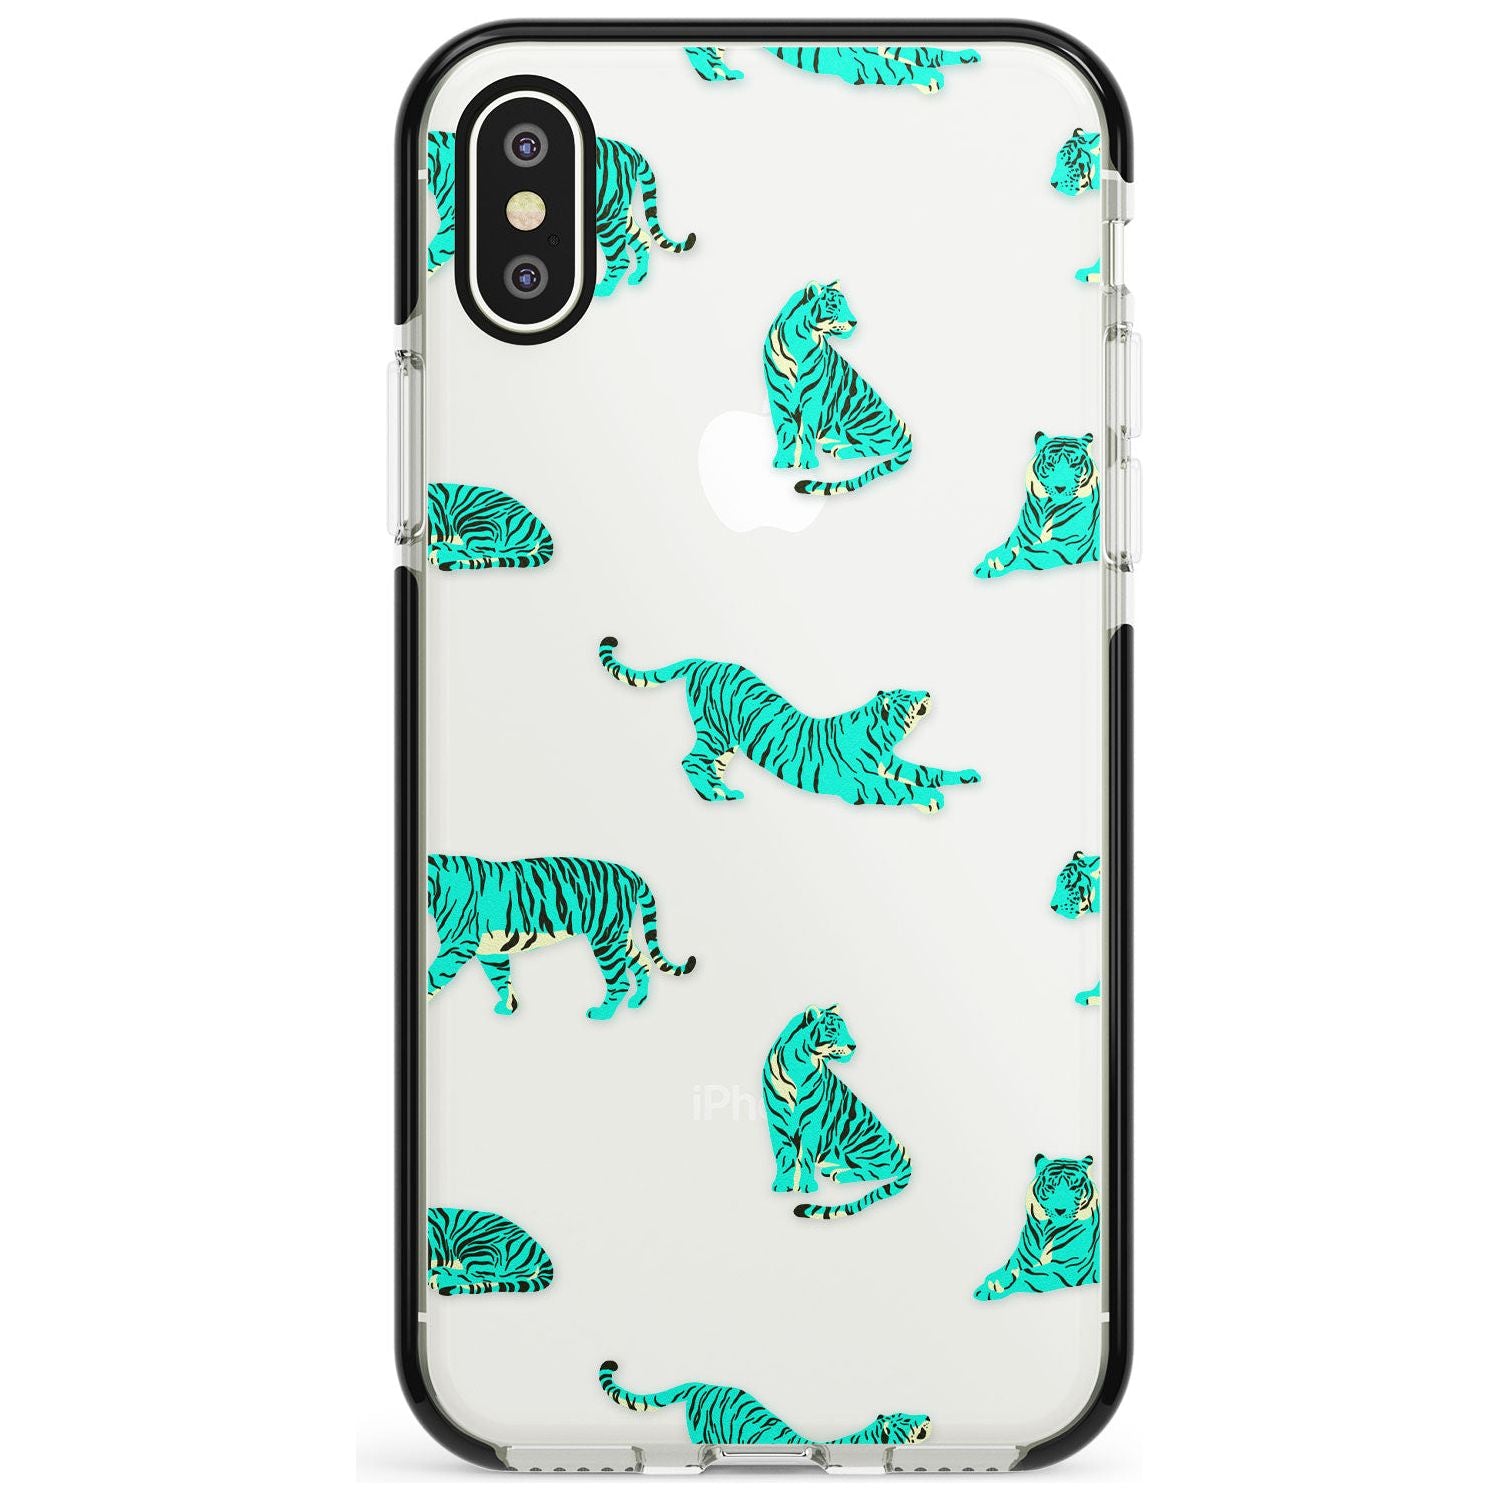 Turquoise Tiger Jungle Cat Pattern Black Impact Phone Case for iPhone X XS Max XR